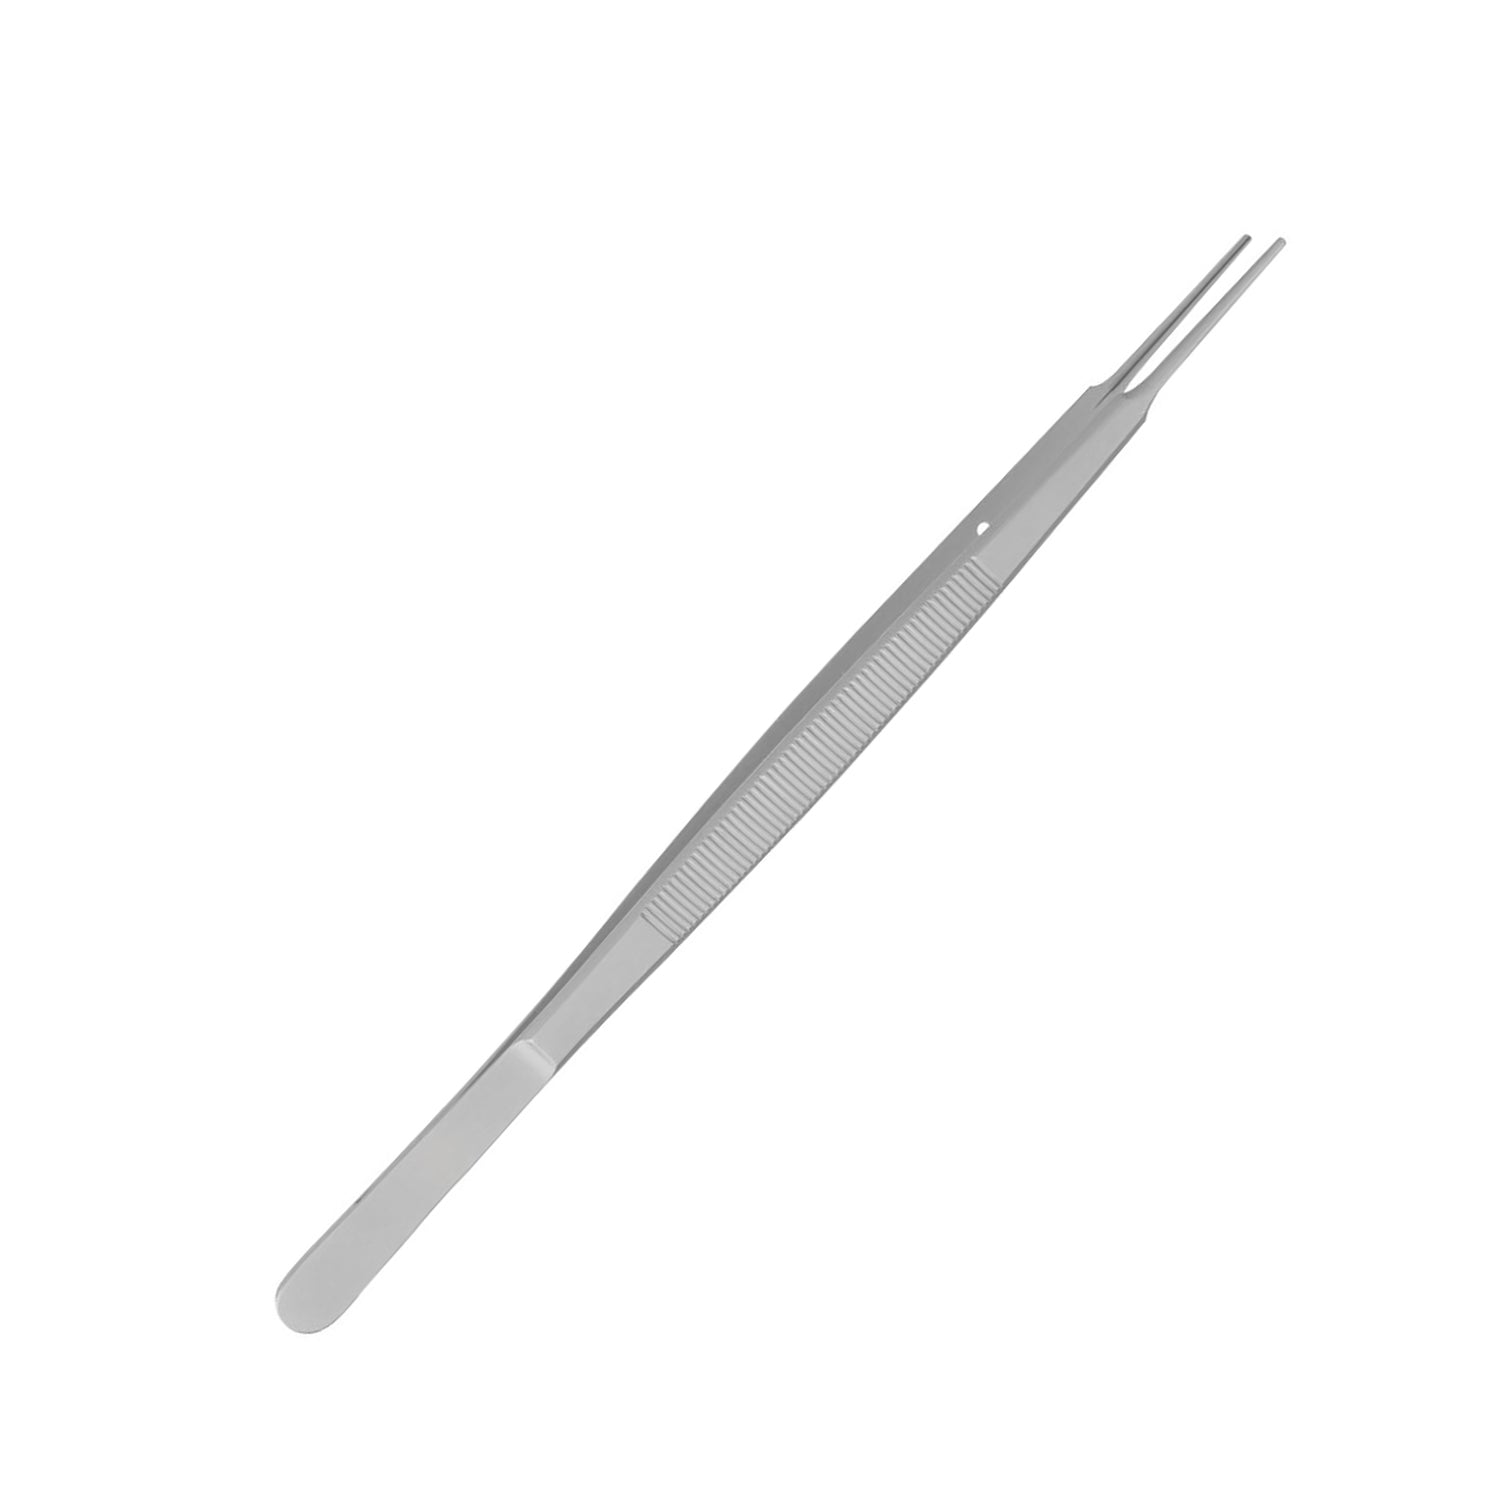 Precise Touch Gerald-debakey Forceps Straight